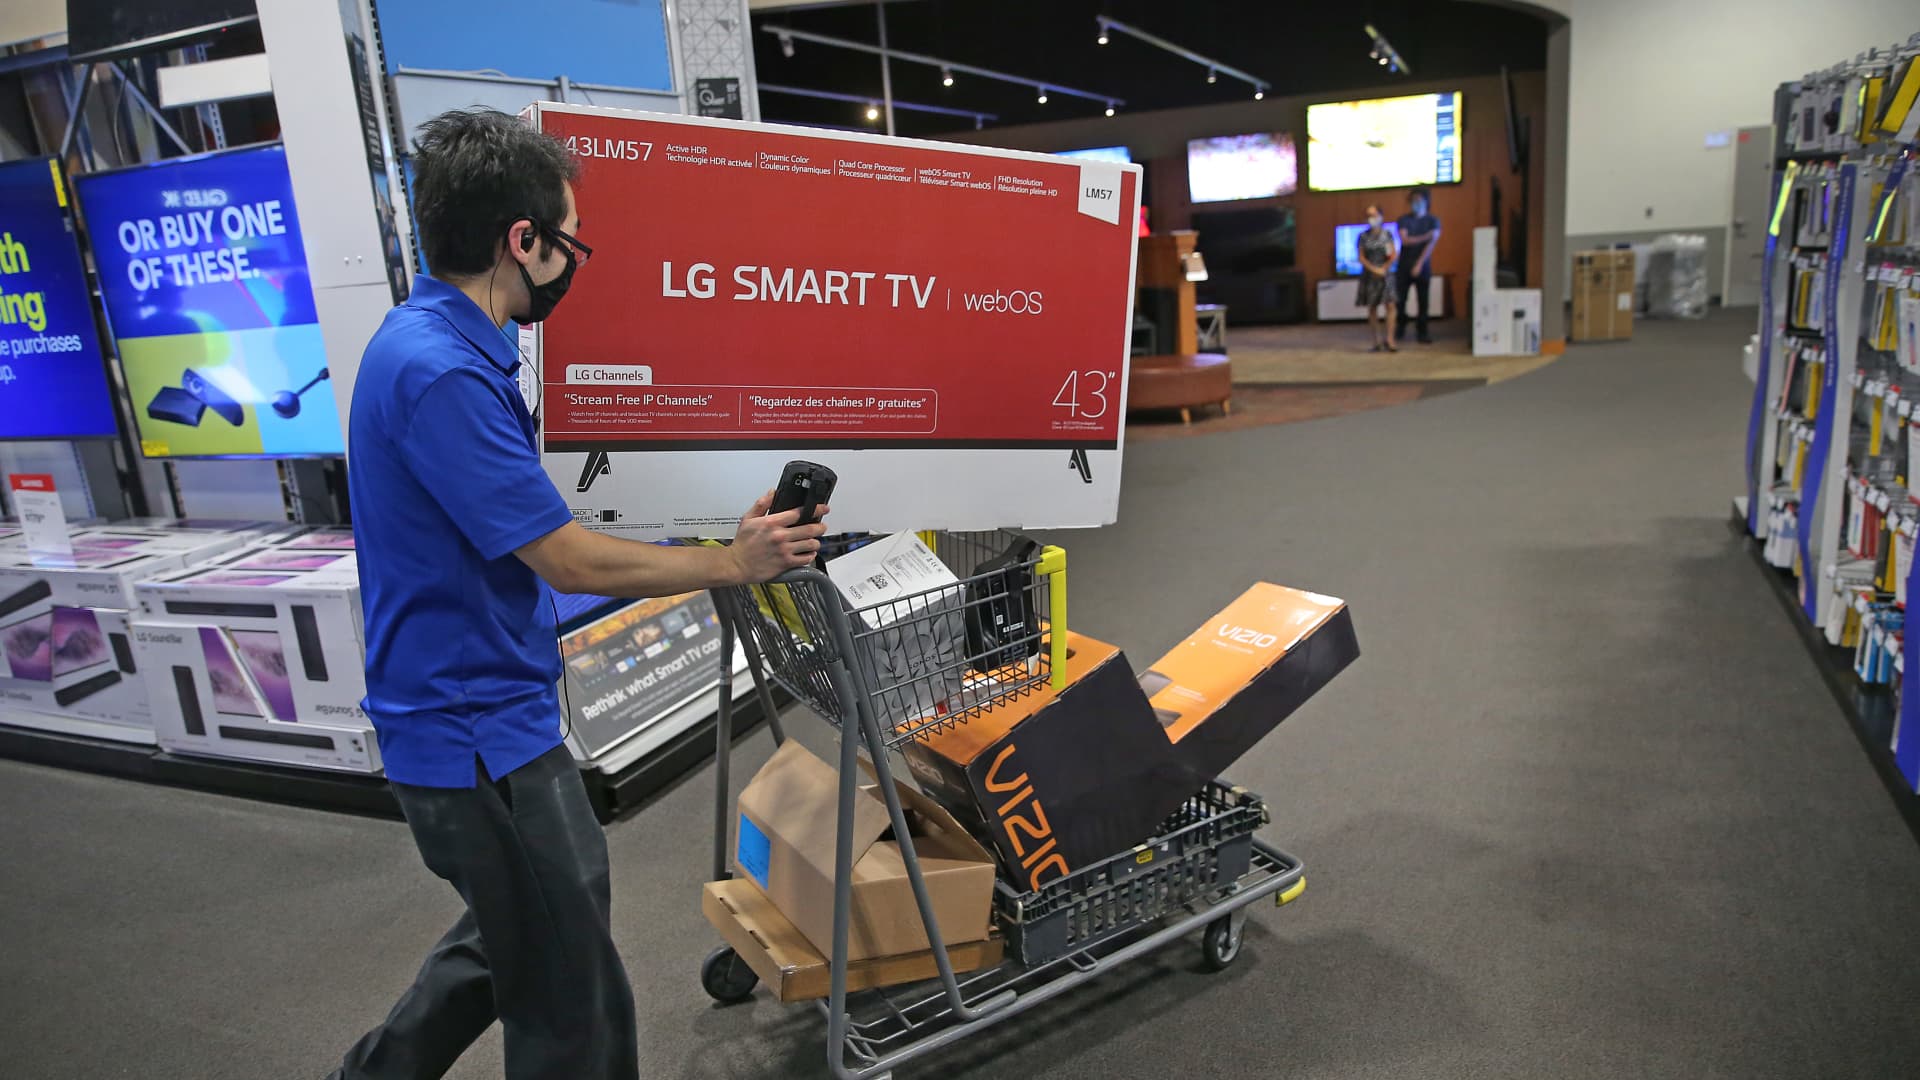 A Best Buy employee uses a cart to do shopping for an online customer at South Bay Center in Boston on Nov. 10, 2020. Retail trends are changing during the Covid-19 pandemic, and Best Buy has begun offering their holiday Black Friday sales and deals earlier in the month to thin out crowds.